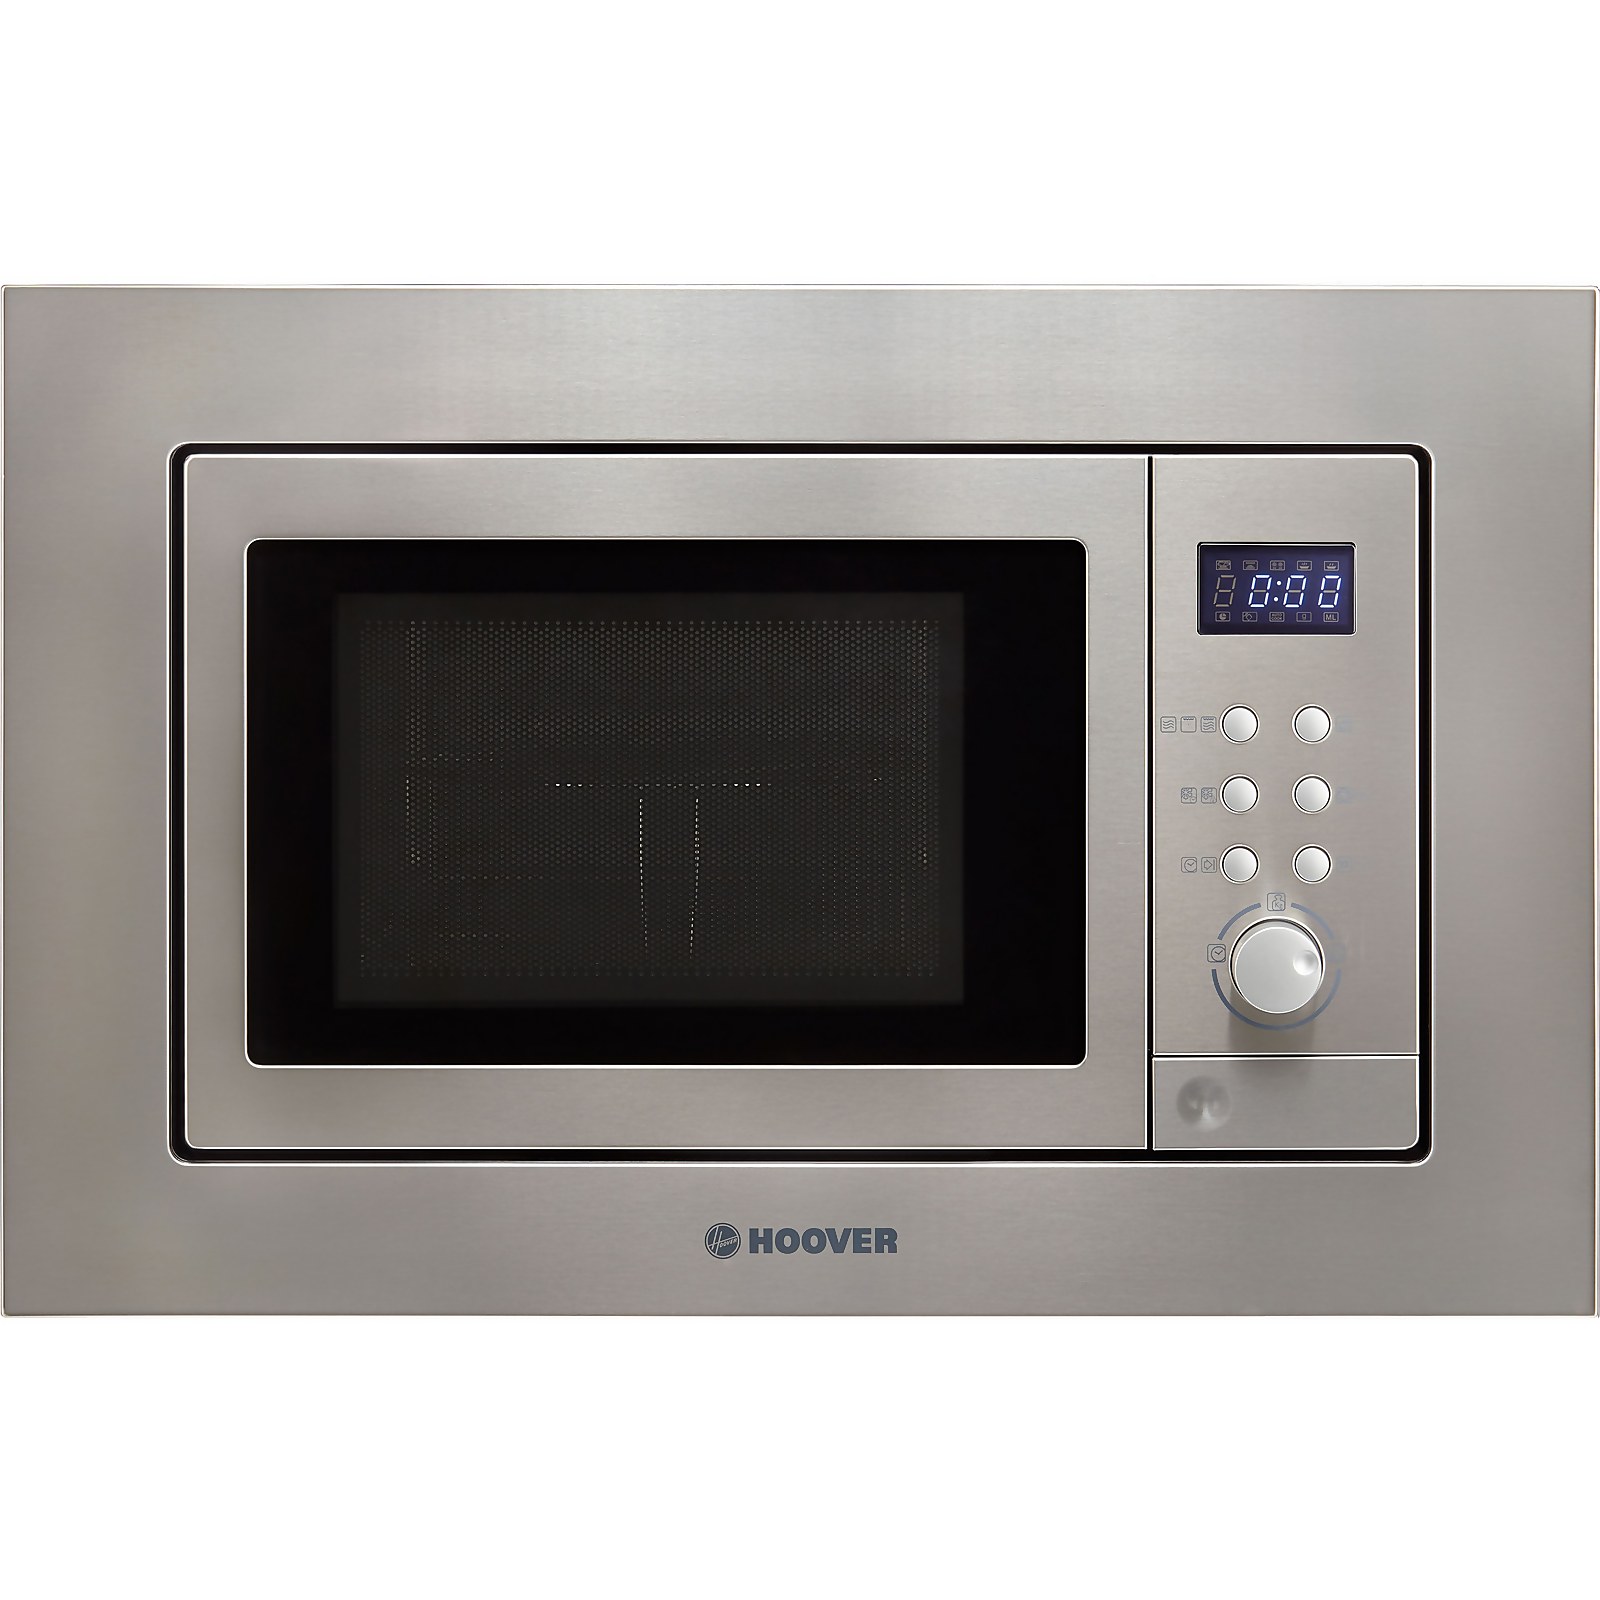 Hoover H-MICROWAVE 100 HM20GX Built In Microwave With Grill - Stainless Steel